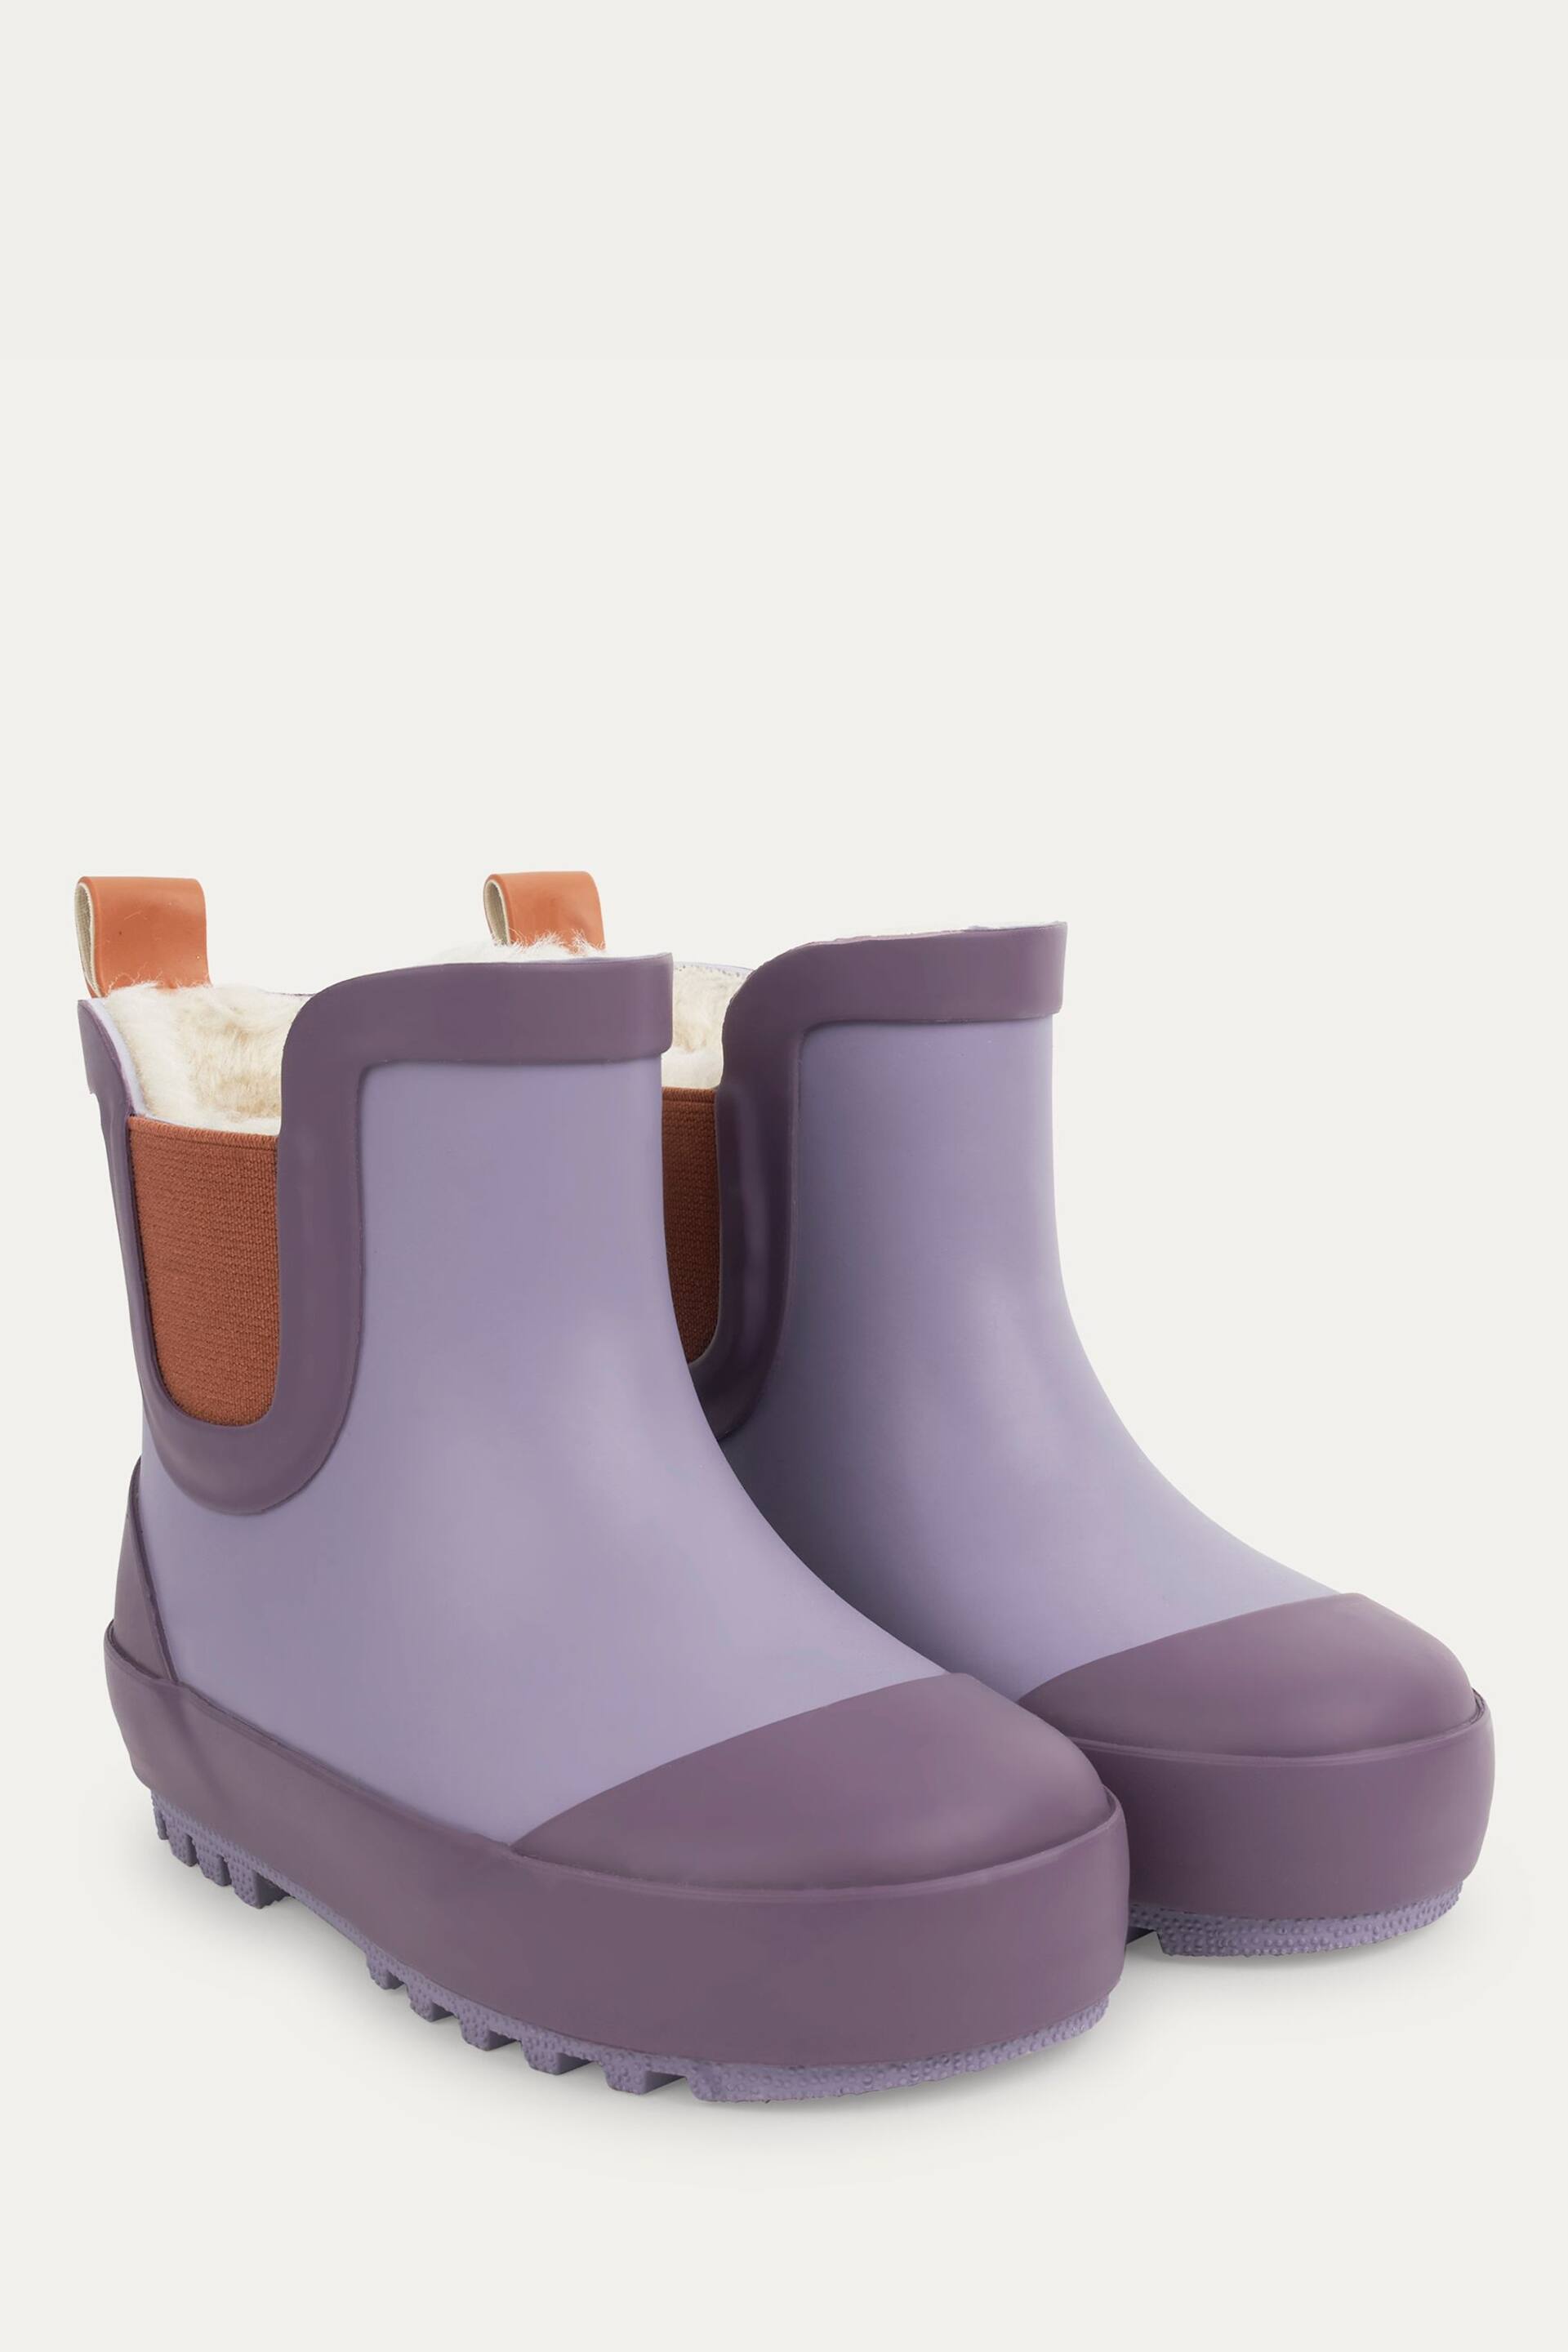 KIDLY Short Lined Wellies - Image 1 of 5